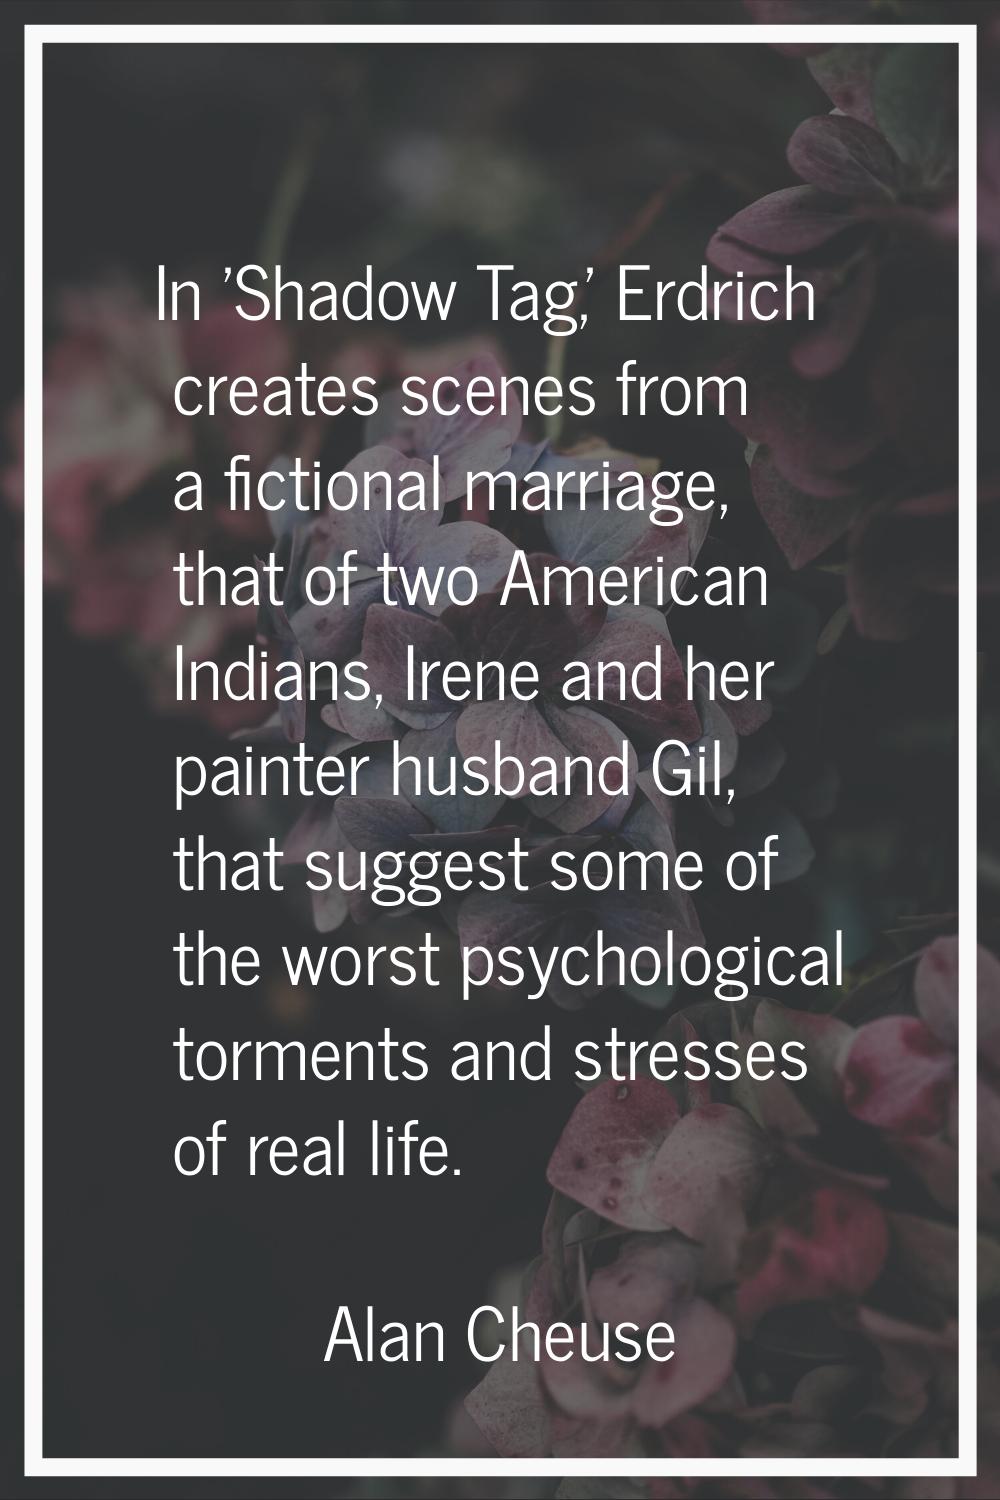 In 'Shadow Tag,' Erdrich creates scenes from a fictional marriage, that of two American Indians, Ir